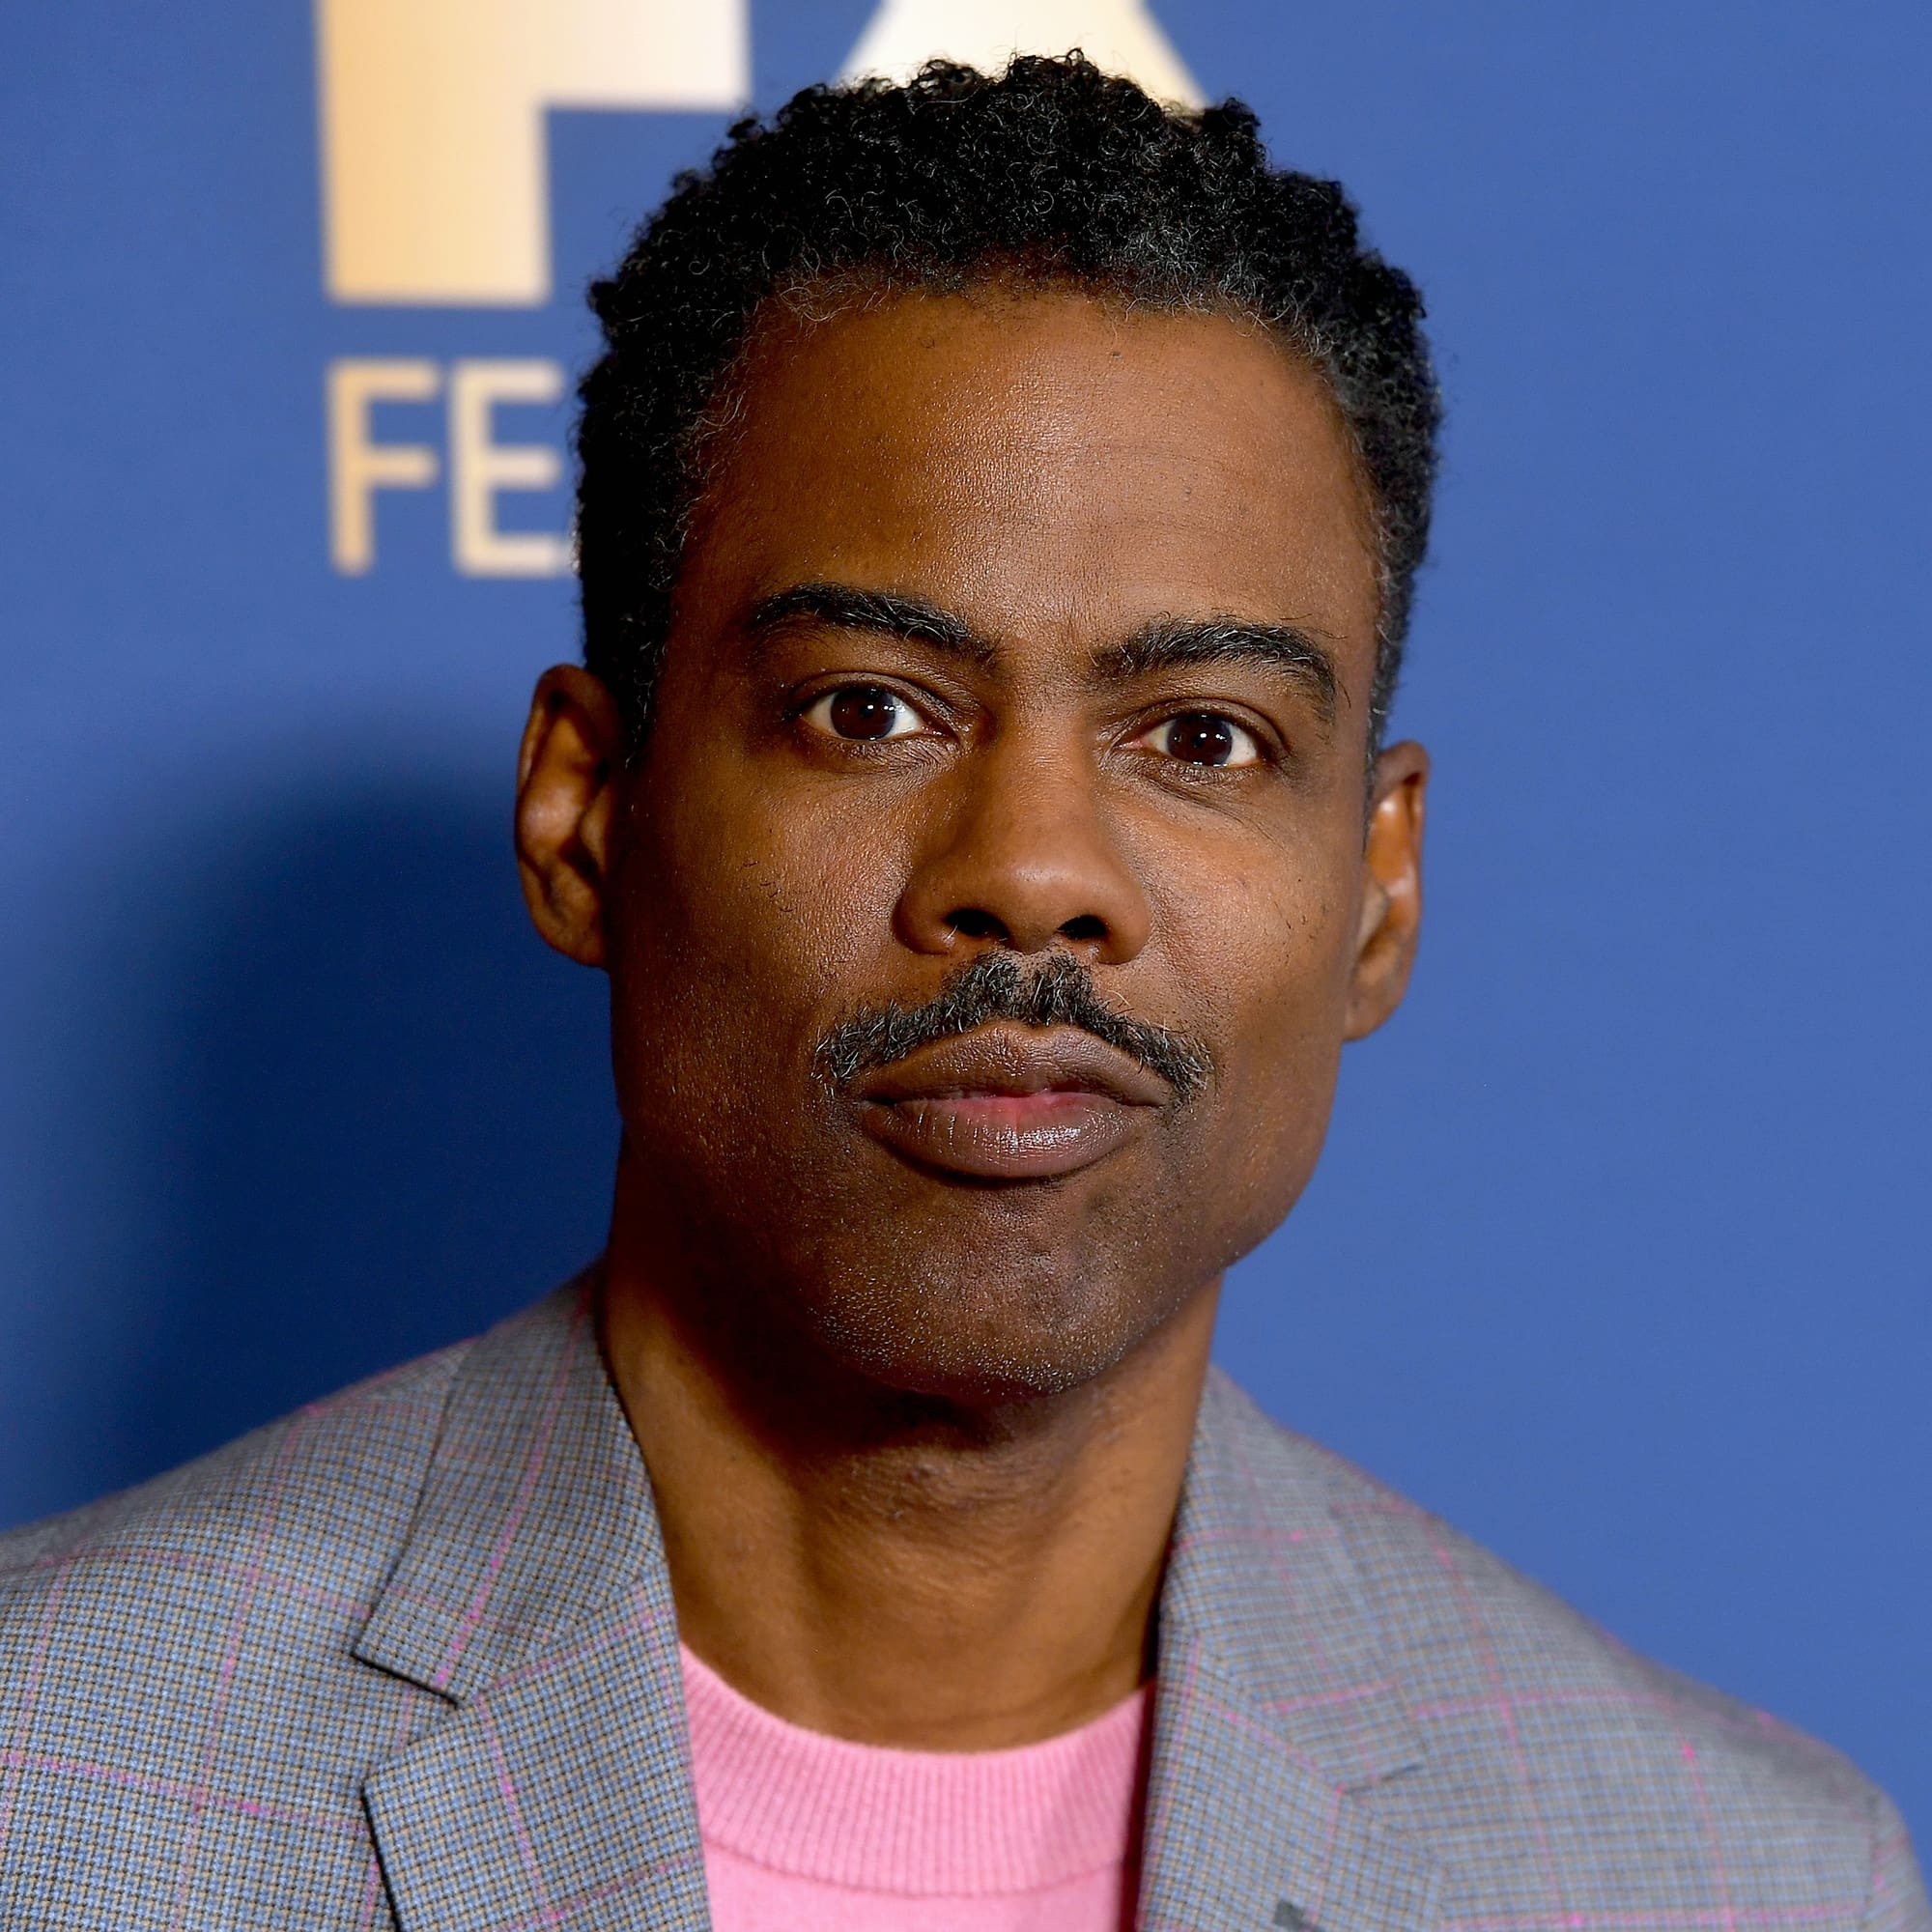 Chris Rock Continues To Joke About Will Smith's Oscars Slap But Has Yet To Respond To His Public Apology